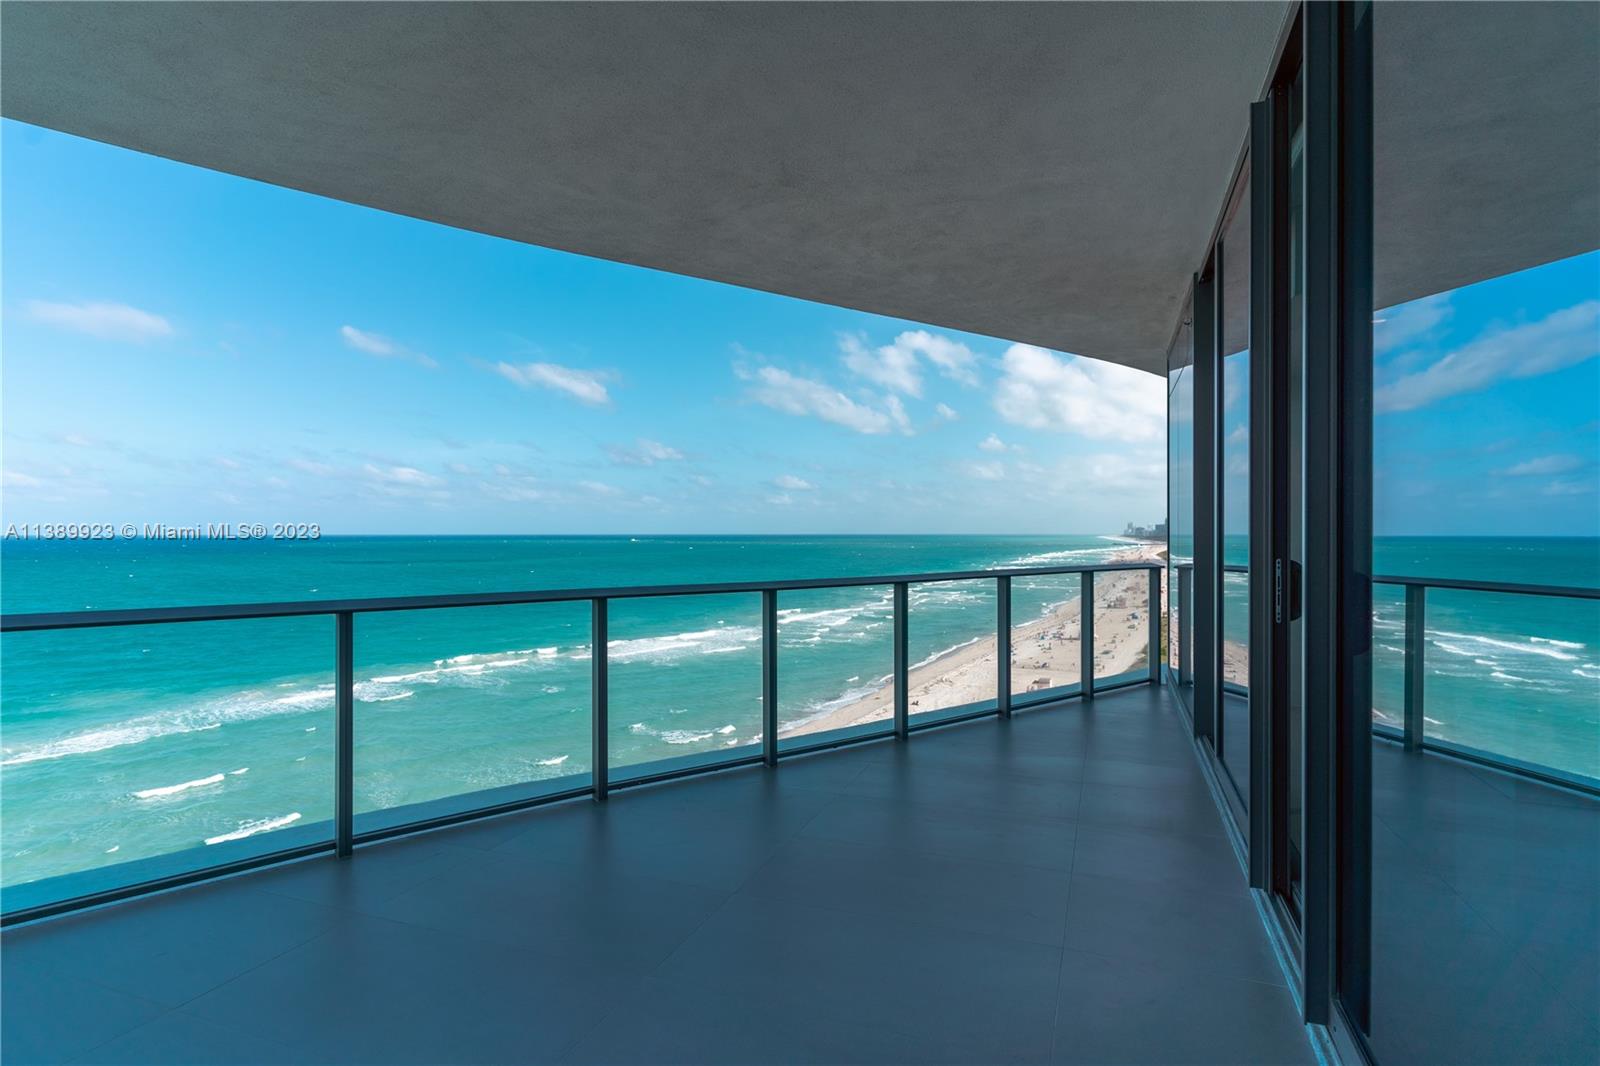 Imagine waking up to the sound of waves crashing on the shore, you are living the dream in this luxury beachfront condo at the Ritz-Carlton Residences in Sunny Isles Beach. This stunning 3-bedroom + den condo features a spacious flow-thru floor plan. Enjoy unobstructed ocean views as well as scenic Intracoastal and Miami skyline views. A private elevator takes you to almost 2,500 square feet of living area with 10-foot ceilings, an Italian-designed kitchen fully equipped with Gaggenau appliances, Caesarstone quartz countertops, a wine cooler, and a built-in cappuccino maker. Enjoy exceptional amenities including a 24-hour concierge, gym and spa, sunrise and sunset pools, 250 linear feet of beach, restaurant and beach garden, kid's club, and a breathtaking 33rd-floor Club level.